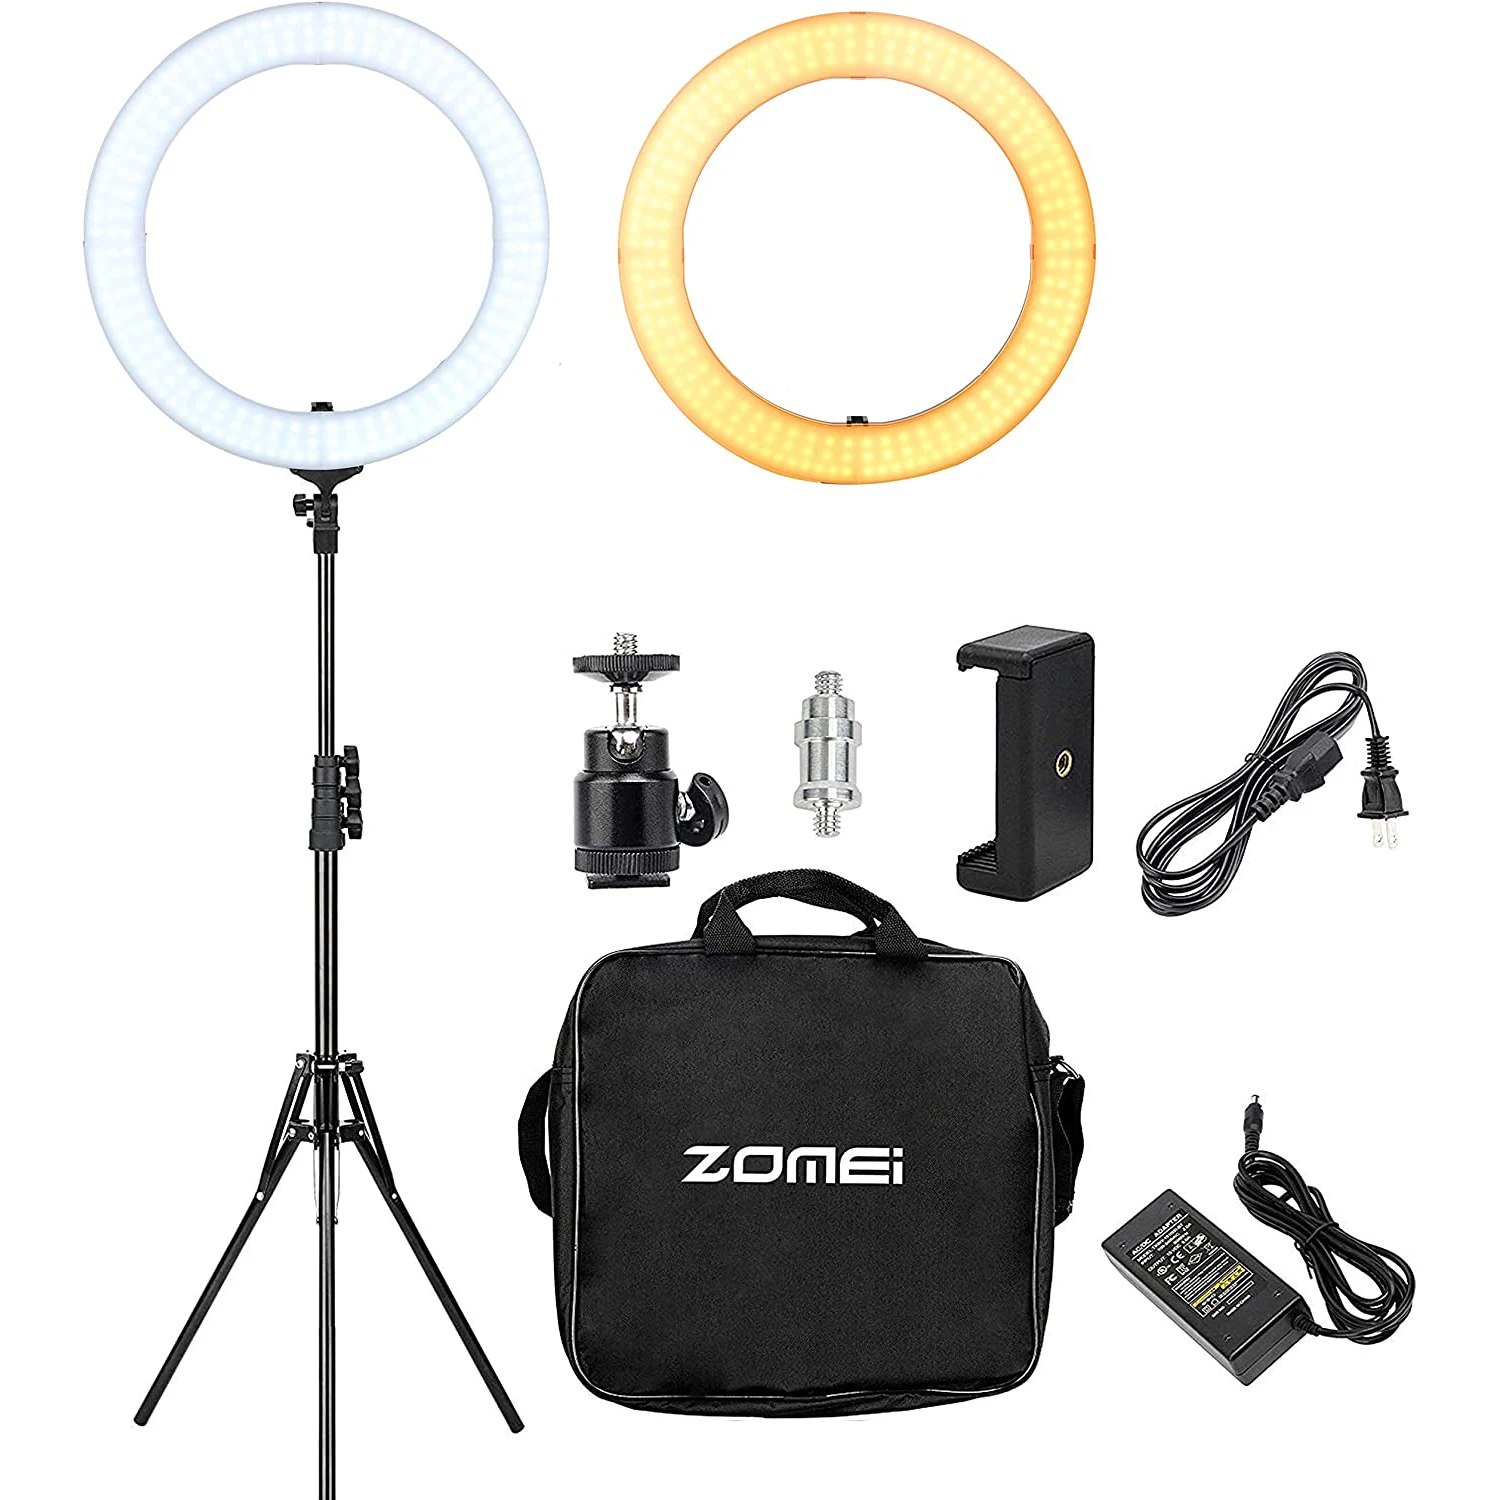 Zomei 18 inch LED Ring Light Dimmable Photographic Lighting Studio Video light 3200-5600K for phone Makeup Live Youtube portrait